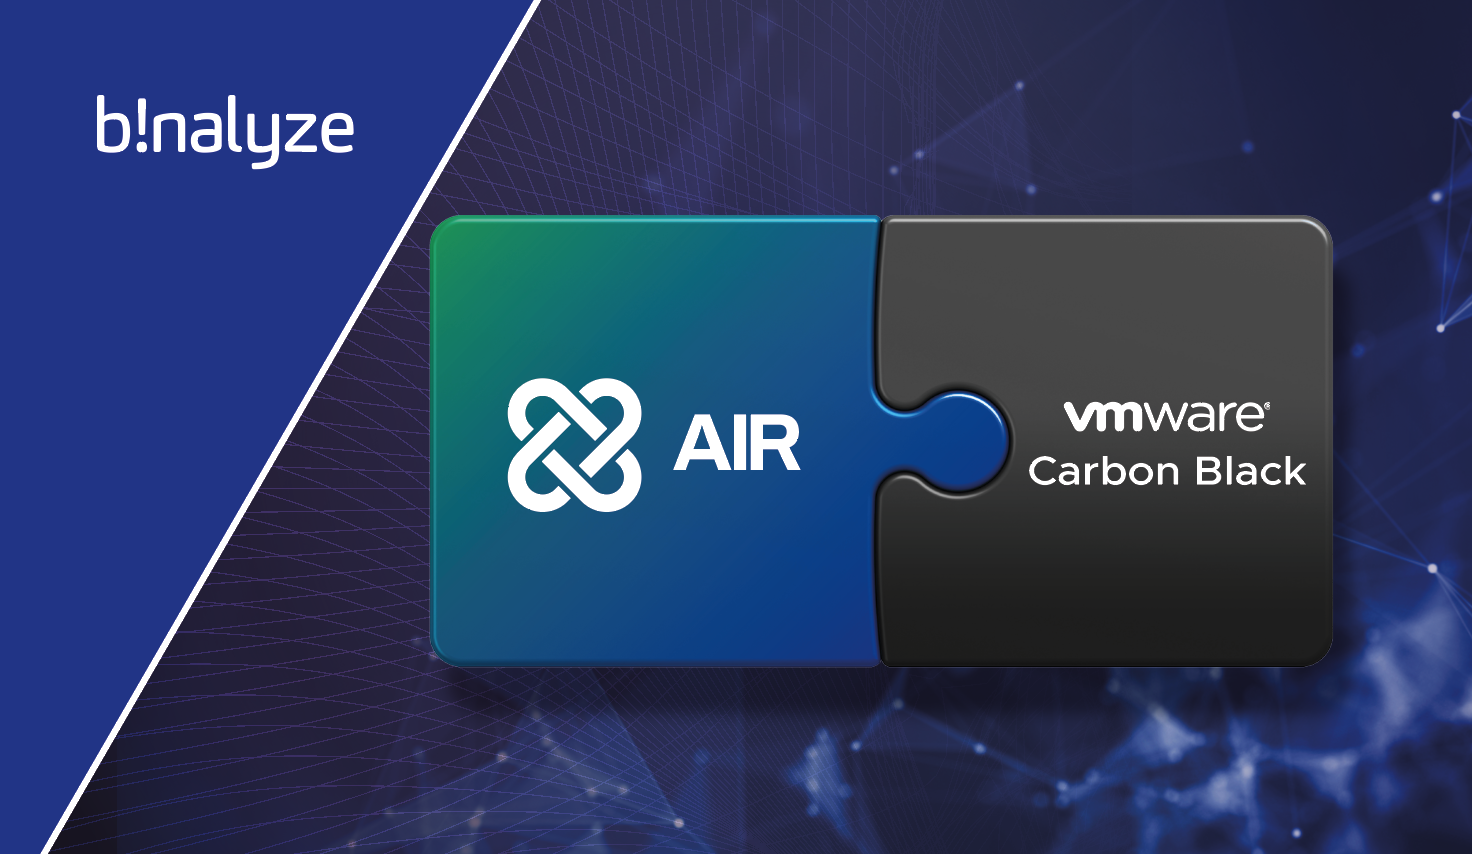 Binalyze AIRs integration with VMware Carbon Black